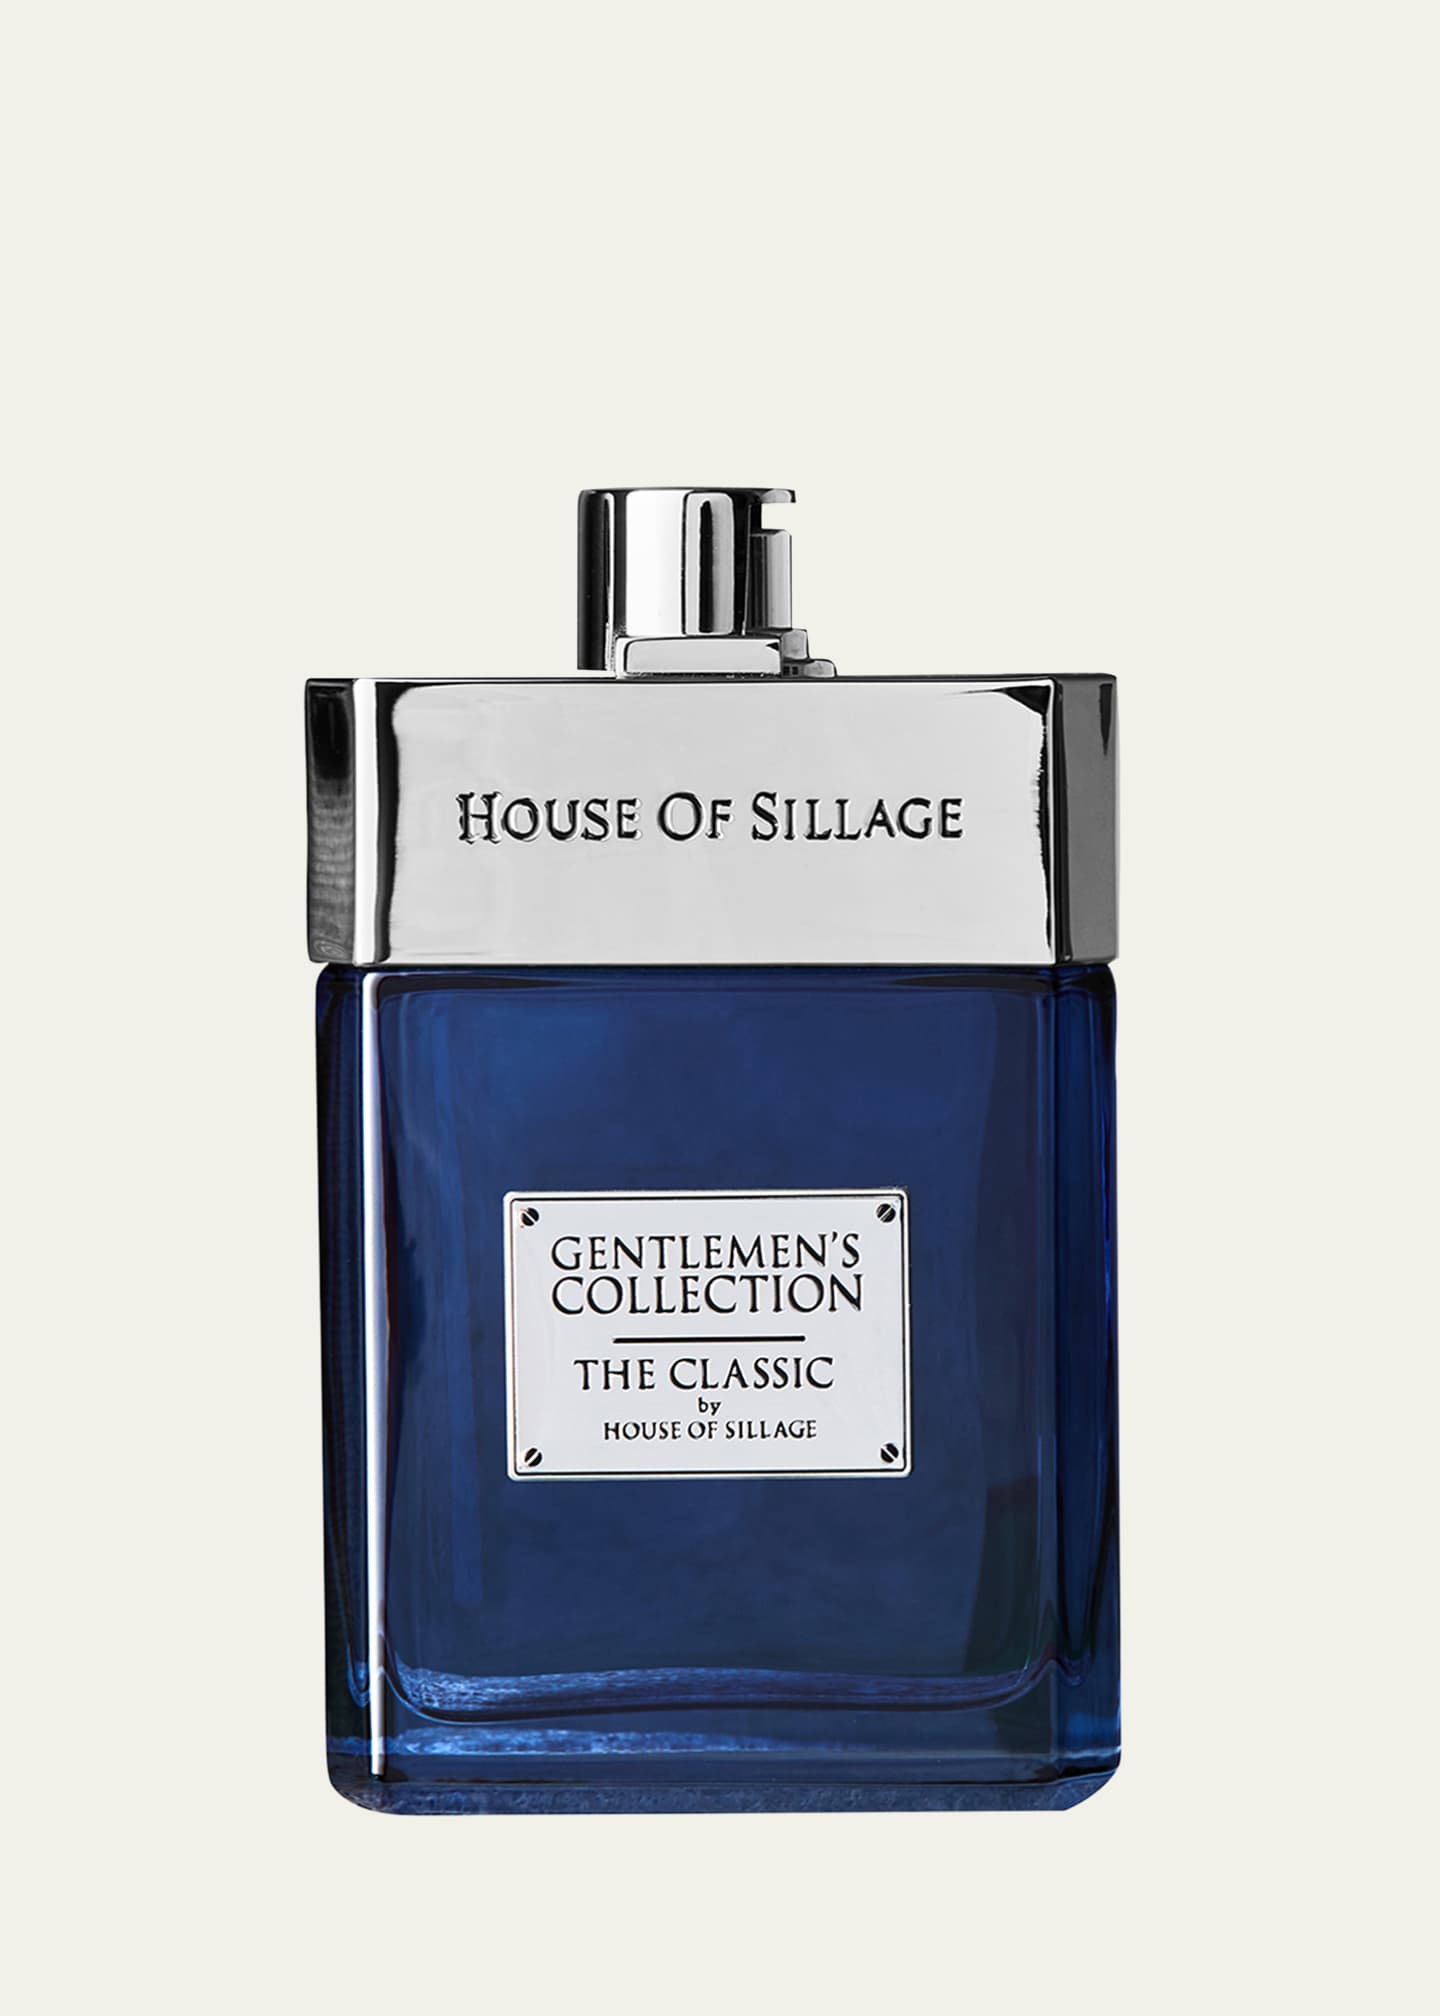 House of Sillage Gentlemen's Collection The Classic, 2.5 oz./ 75